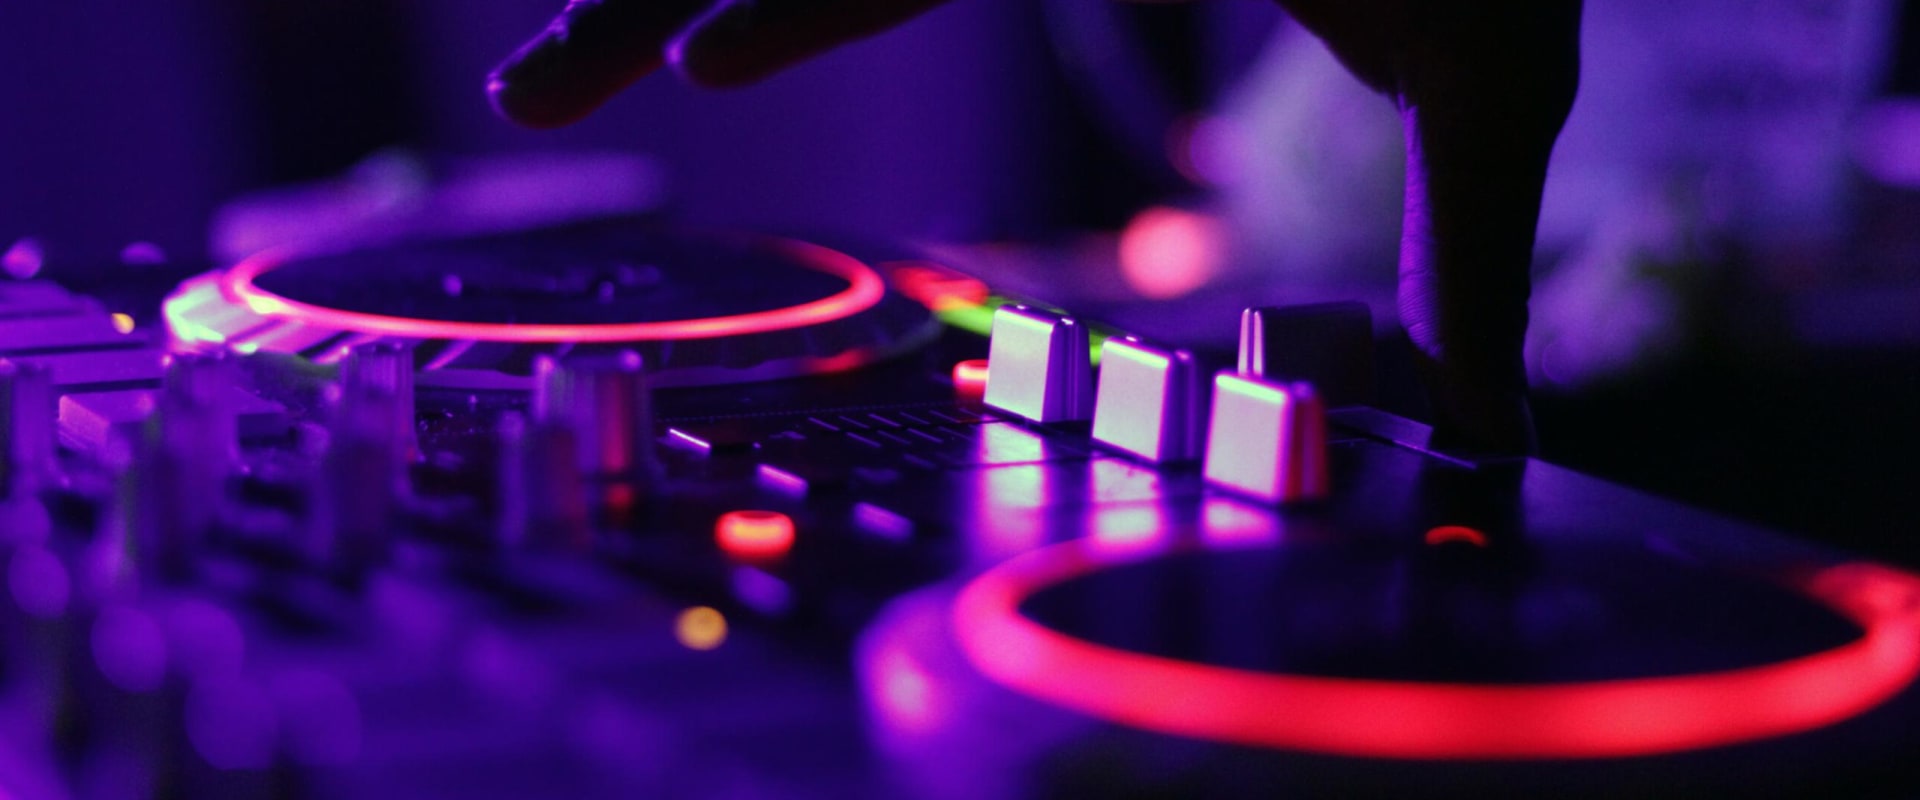 A Complete Guide to DJing House Music